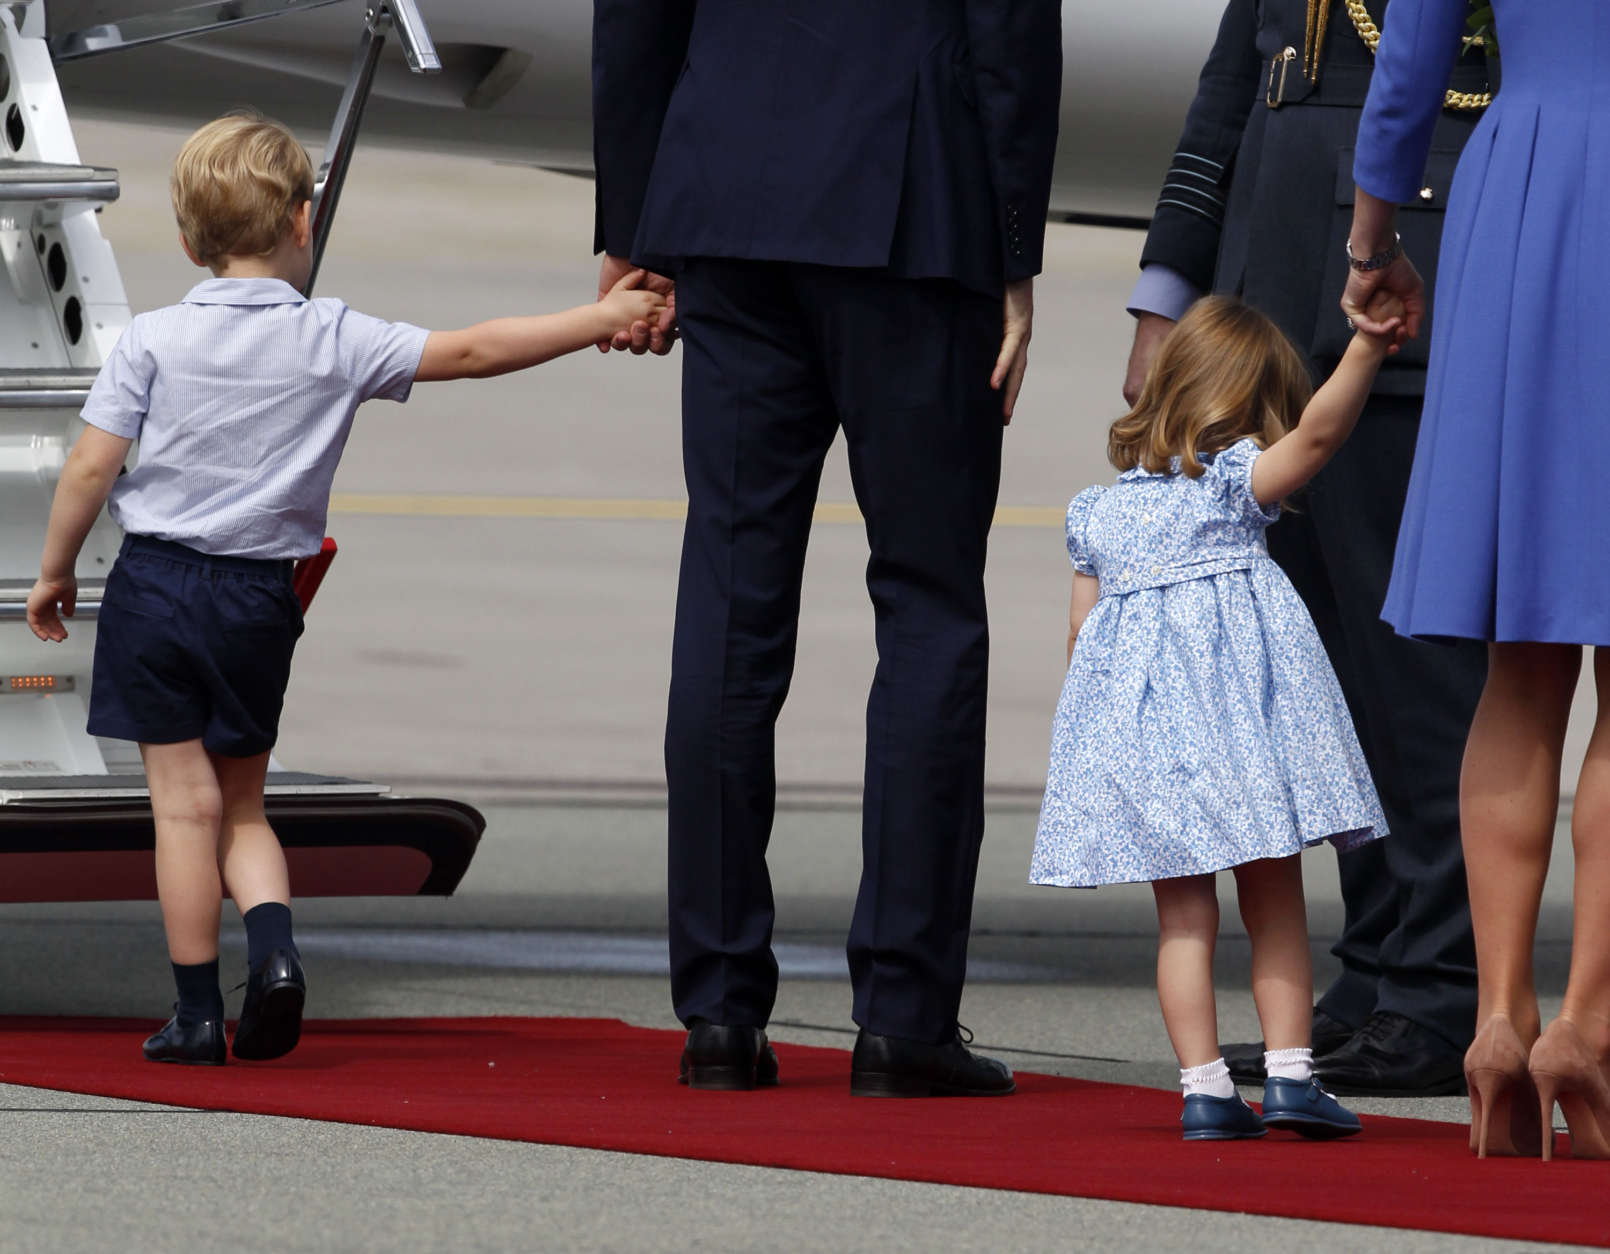 Britain's Prince William, center, and his wife Kate, the Duchess of Cambridge, right, walk with their children Prince George, left, and Princess Charlotte as they leave the airport in Warsaw, Poland, Wednesday, July 19, 2017. The British royal couple is in Poland with their children on a goodwill visit intended to seal friendly ties after Britain leaves the European Union. (AP Photo/Czarek Sokolowski)